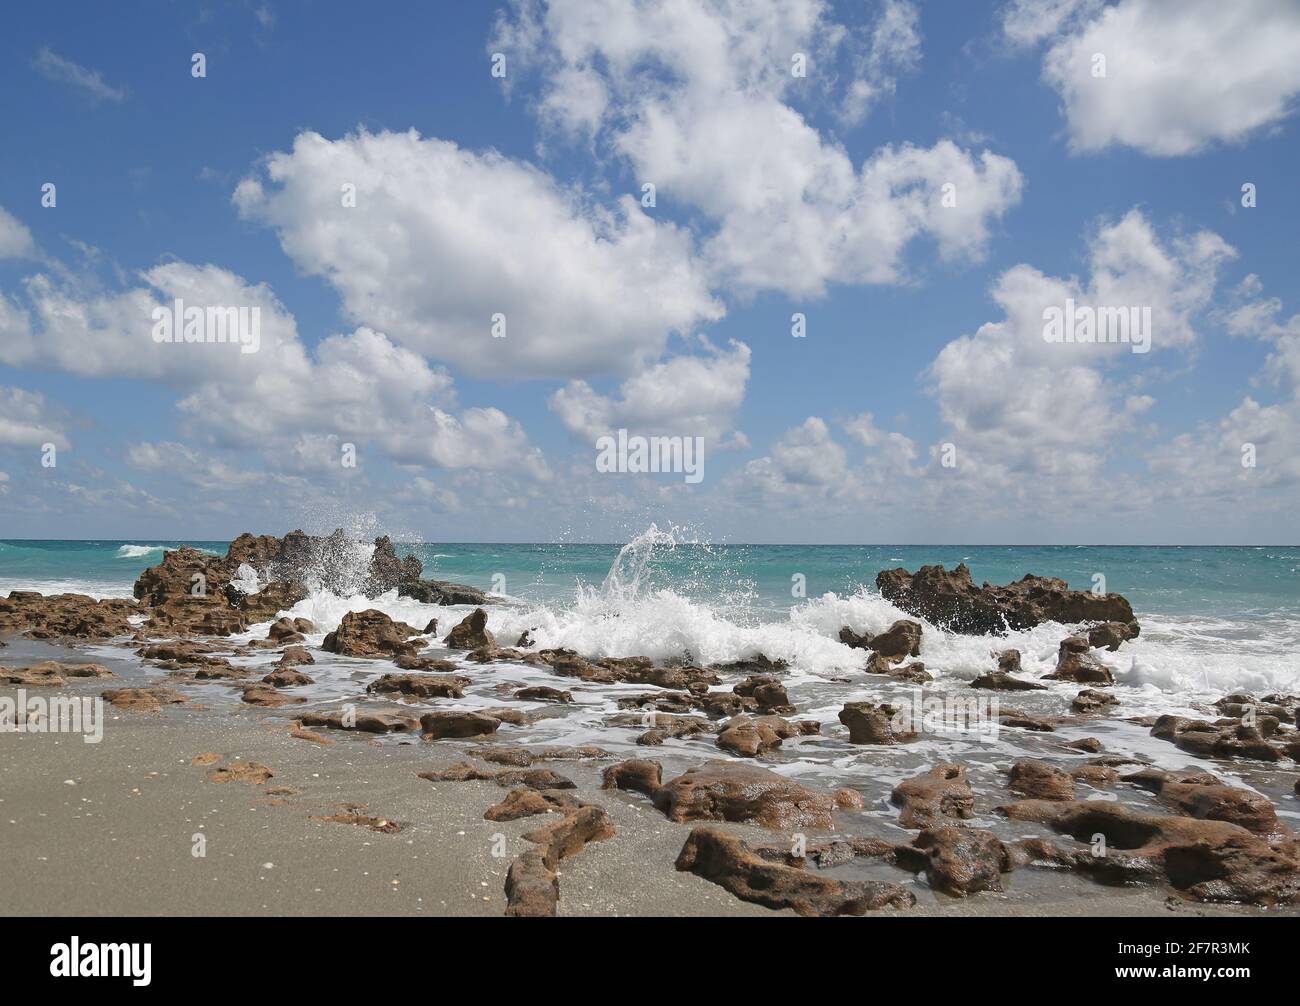 The Atlantic tide comes in on a summer day at Blowing Rocks Preserve on Jupiter Island Florida near Hobe Sound in Martin and Palm Beach counties. Stock Photo